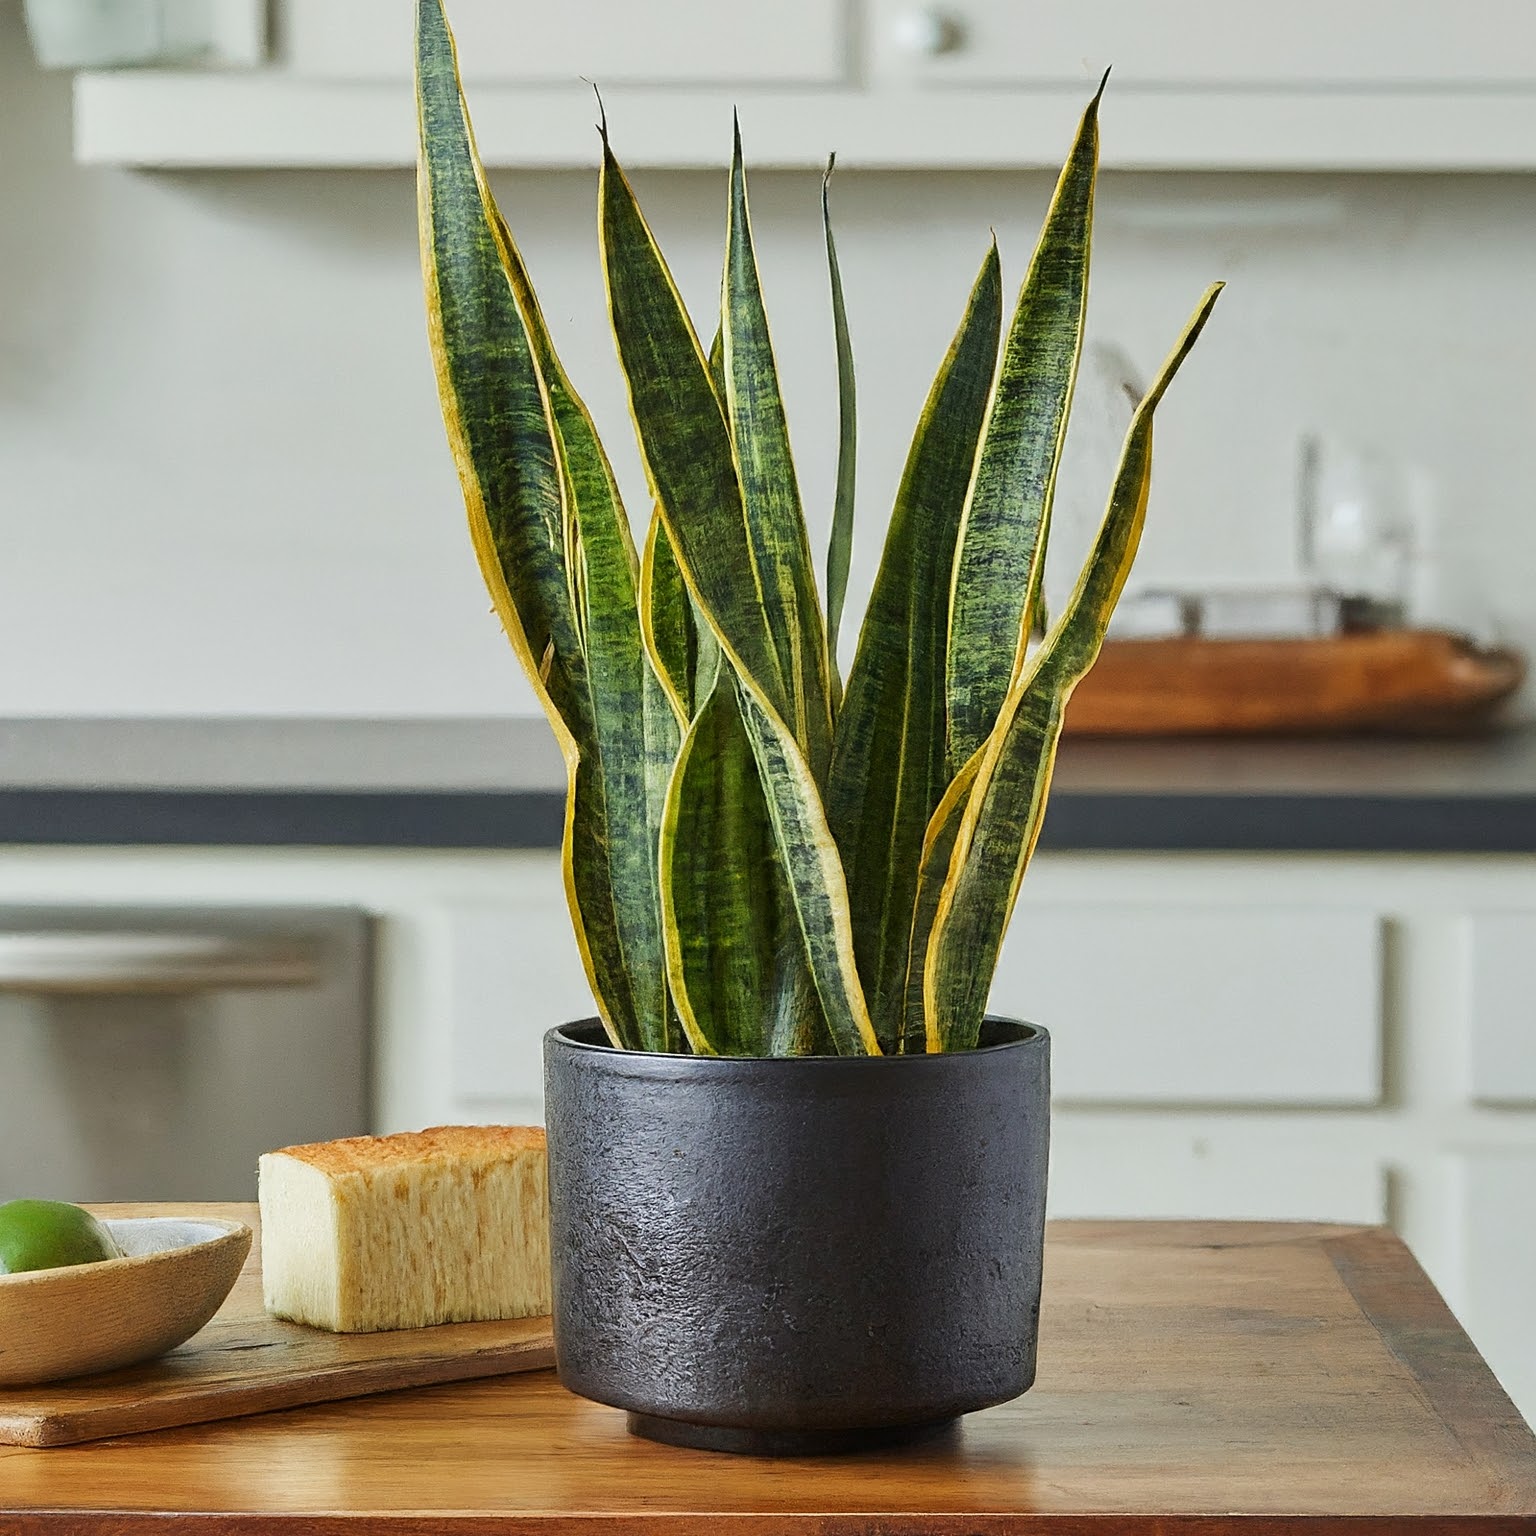 A picture of a snake plant in a kitchen.